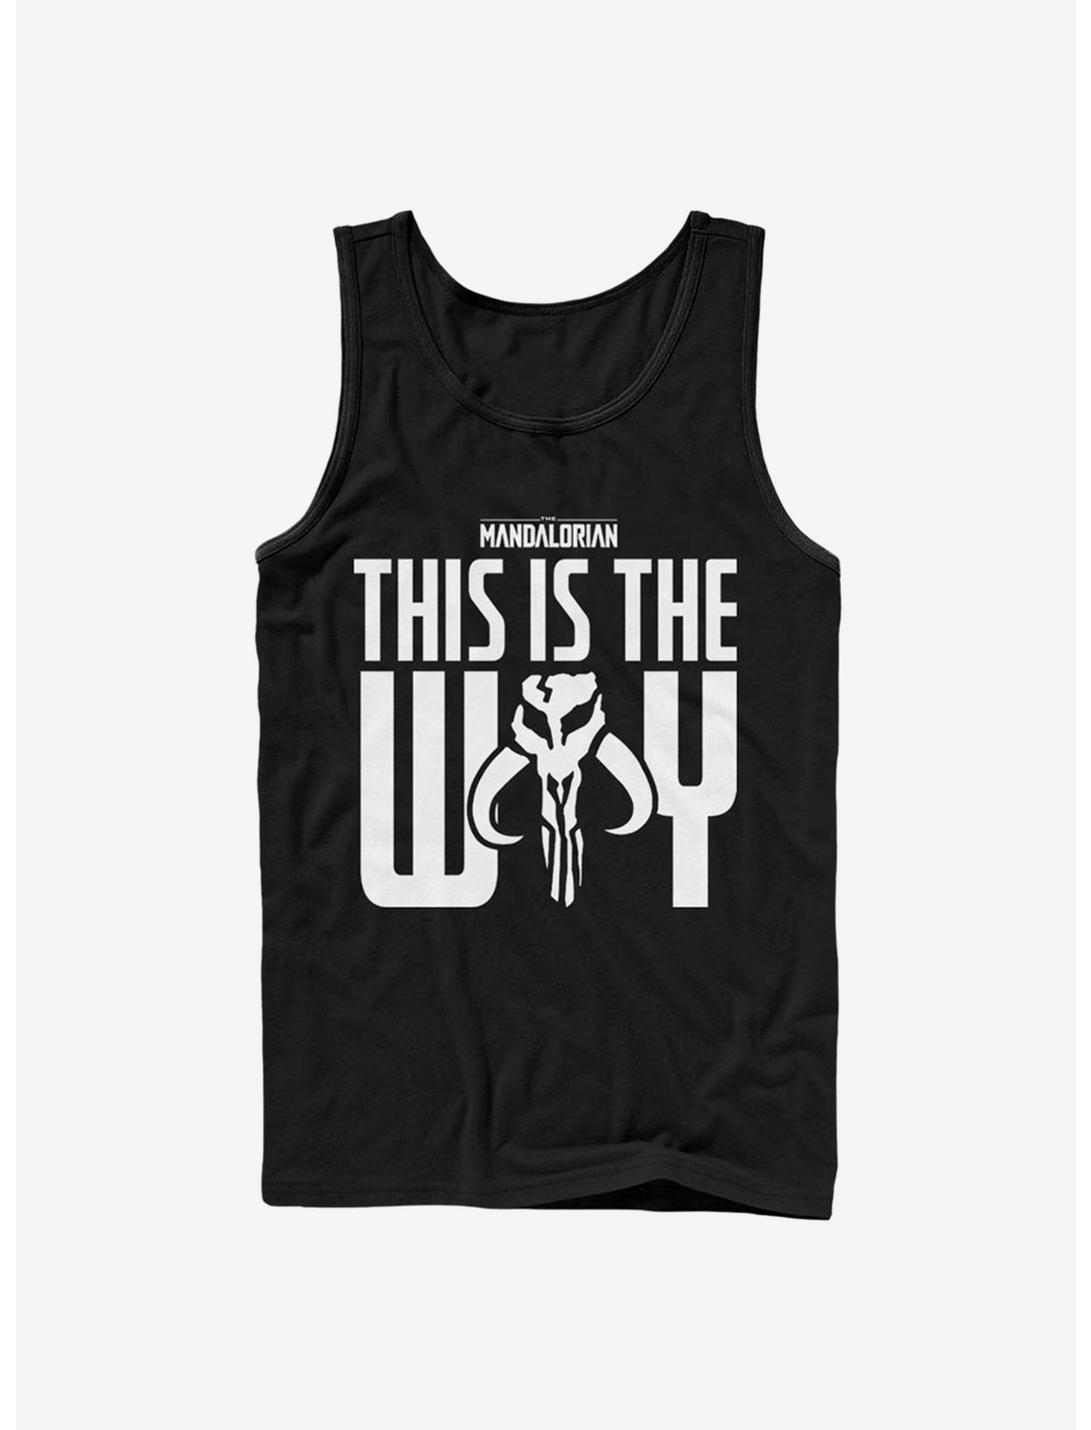 Star Wars The Mandalorian This Is The Way Bold Iron Heart Tank, BLACK, hi-res